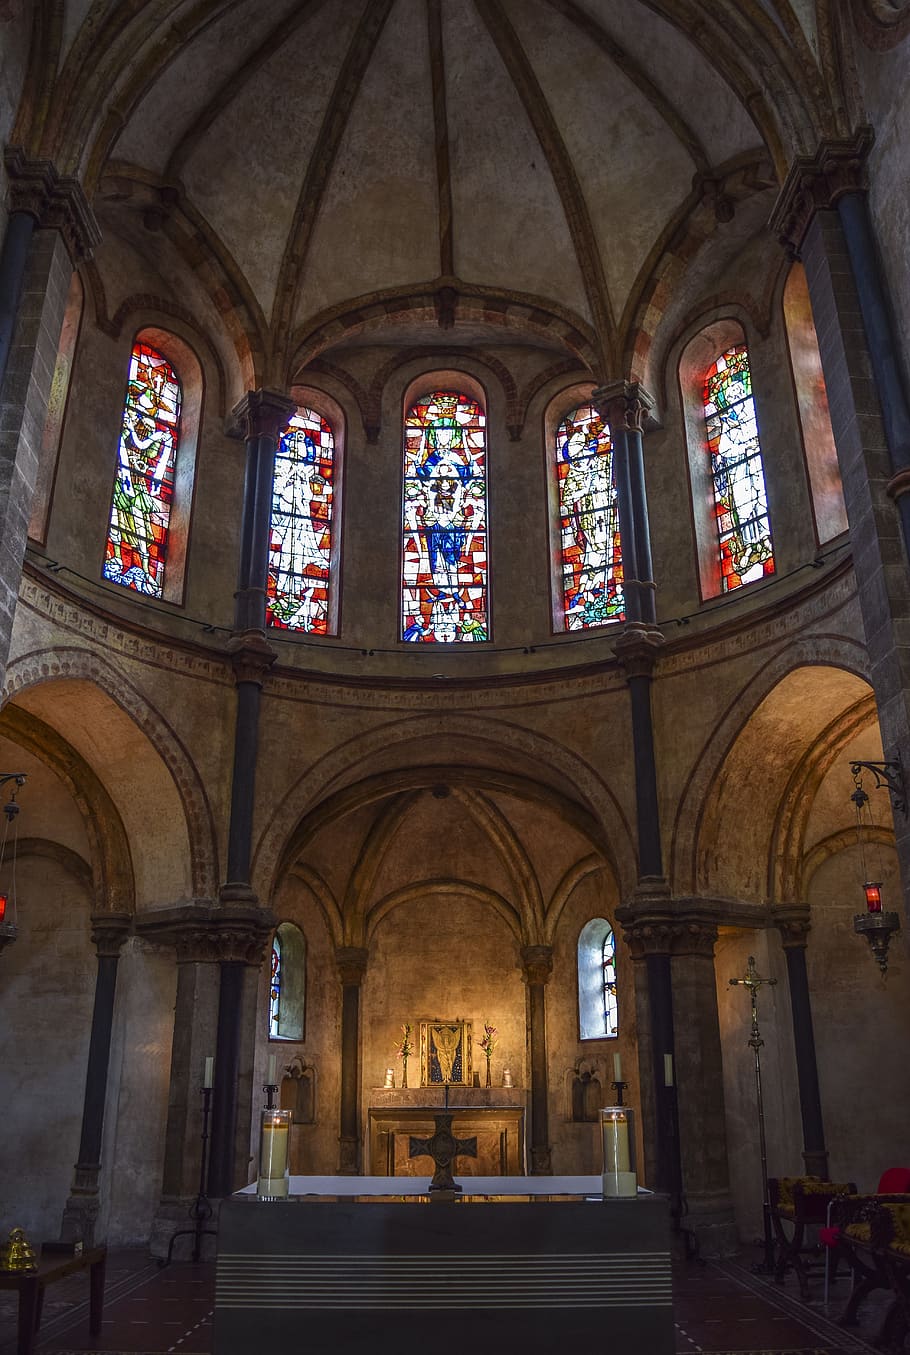 architecture, church, religion, building, church window, light, christianity, historically, middle ages, places of interest